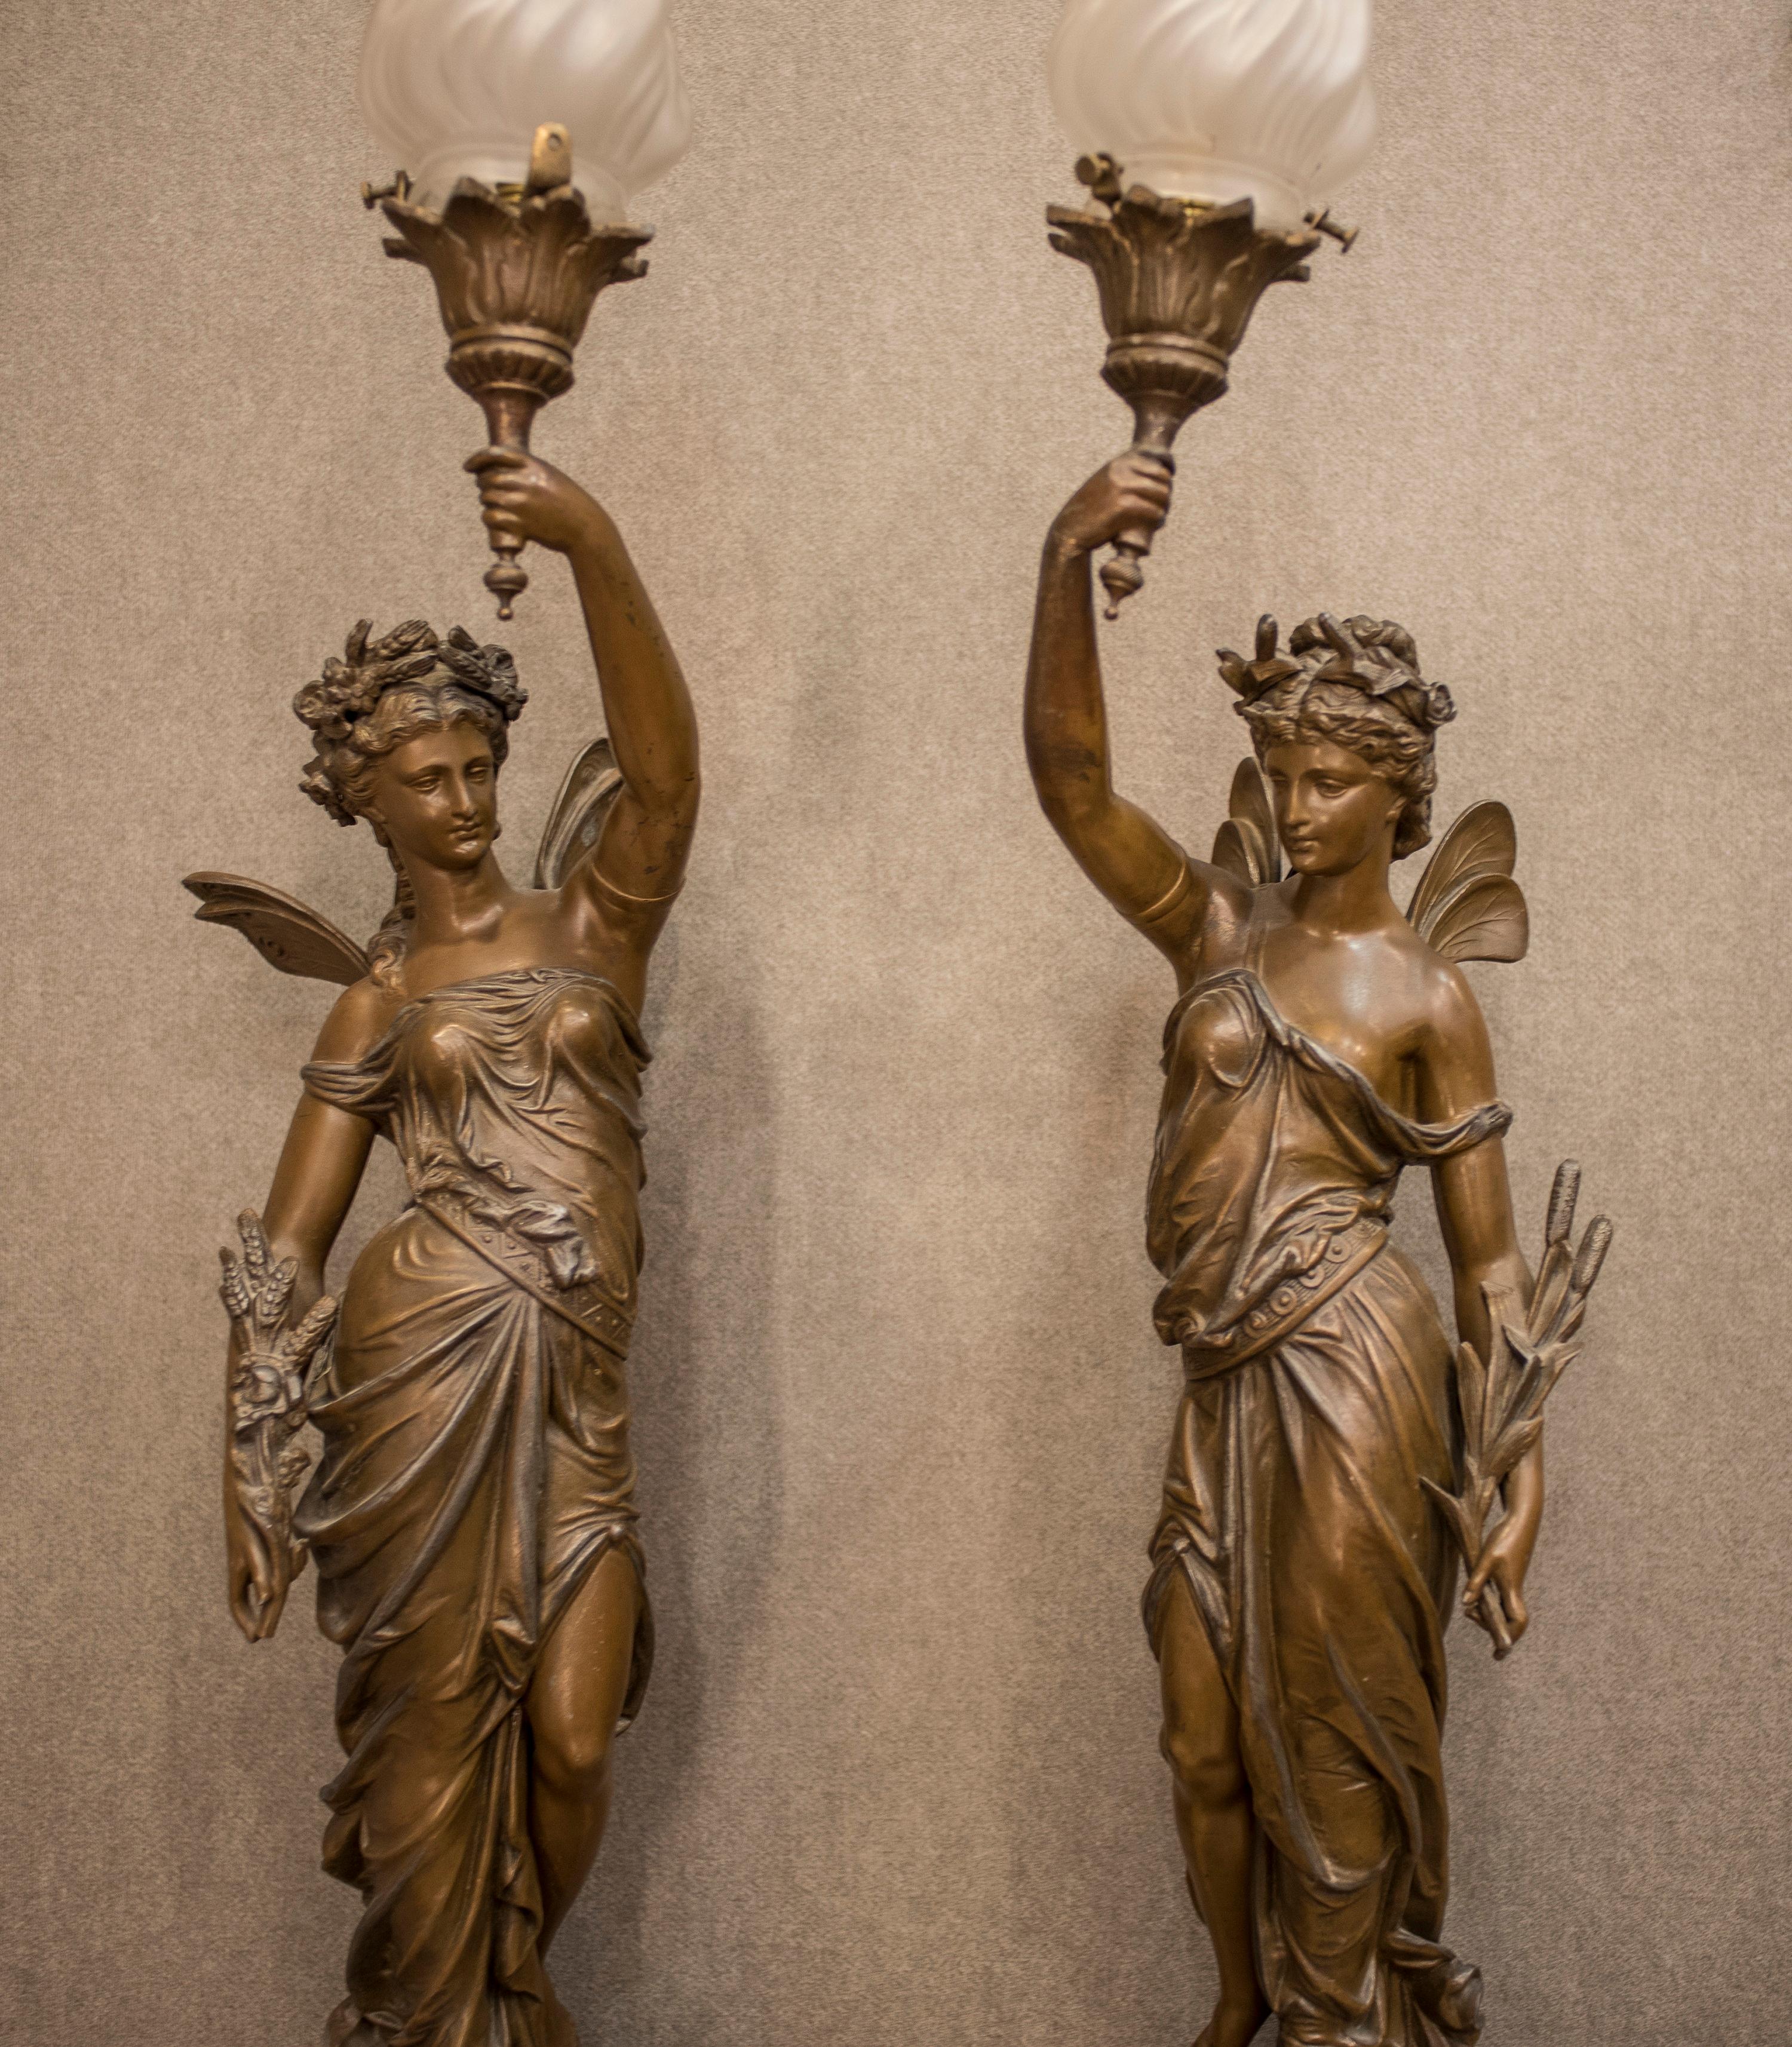 A very fine pair of French PP SXX, neoclassical style patinated calamine, representing a
two allegorical figures with a frosted glass flame, on a marbled wood, Paris, circa 1900
A. Durenne school.
Is a delicate work in its original state. In a